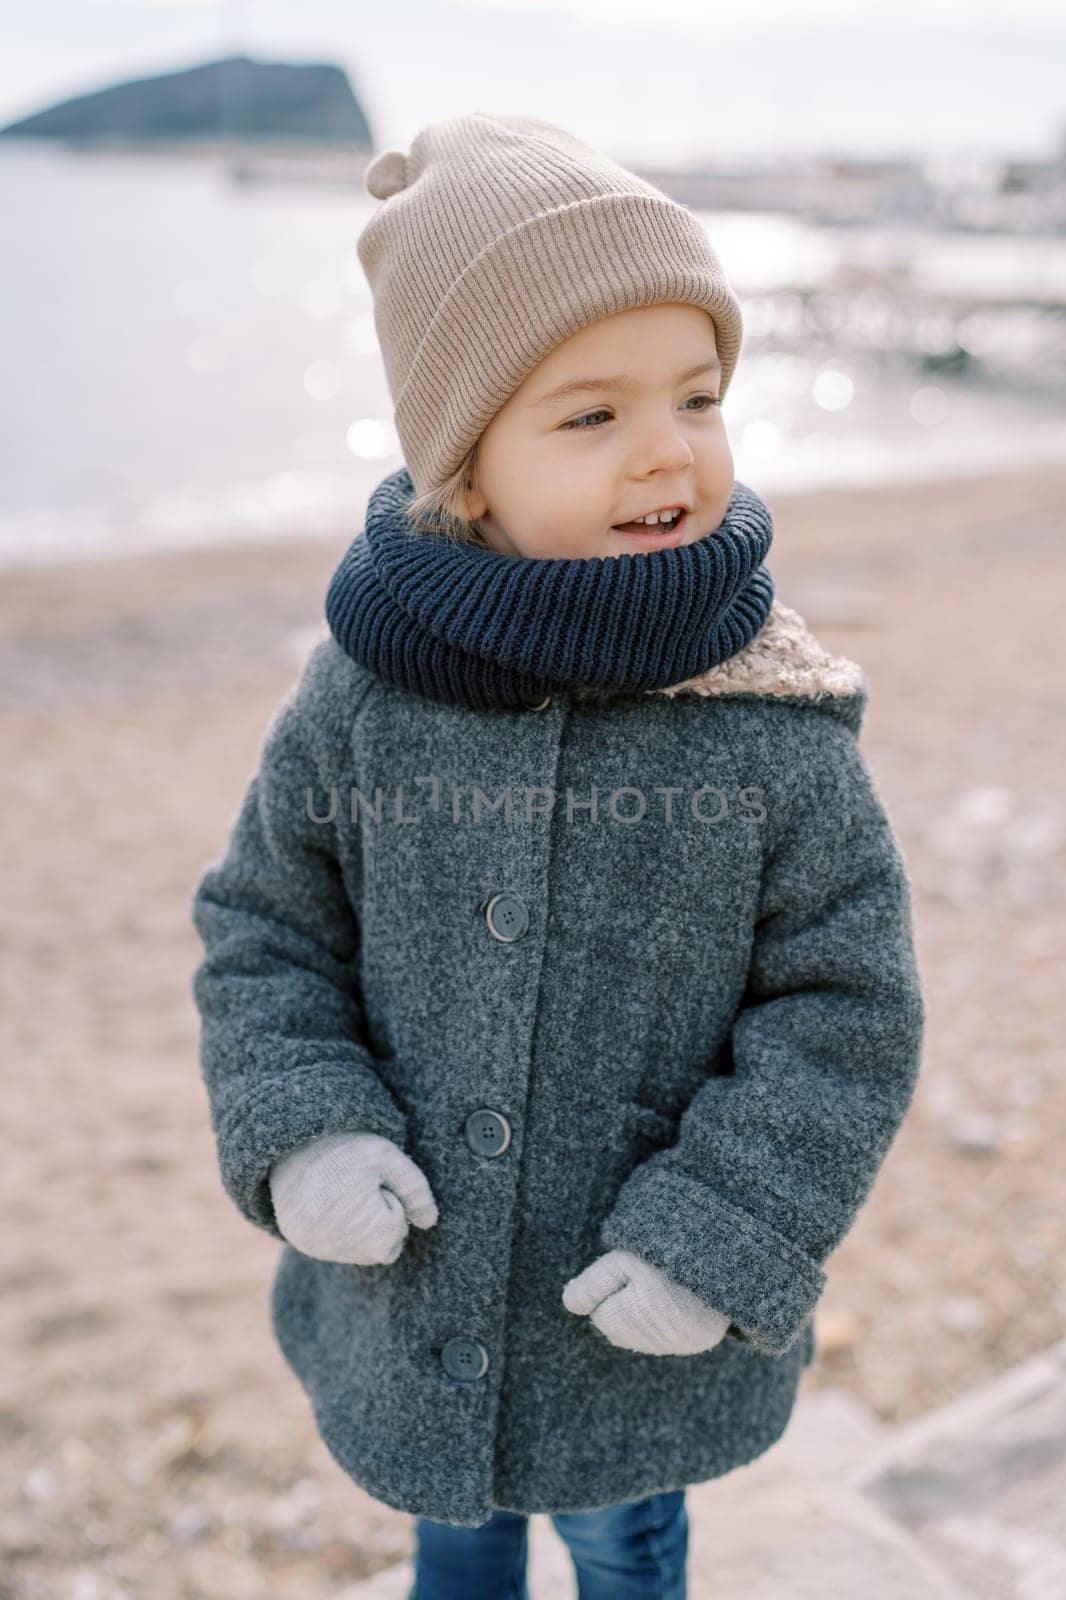 Little smiling girl in mittens stands on the beach looking to the side. High quality photo